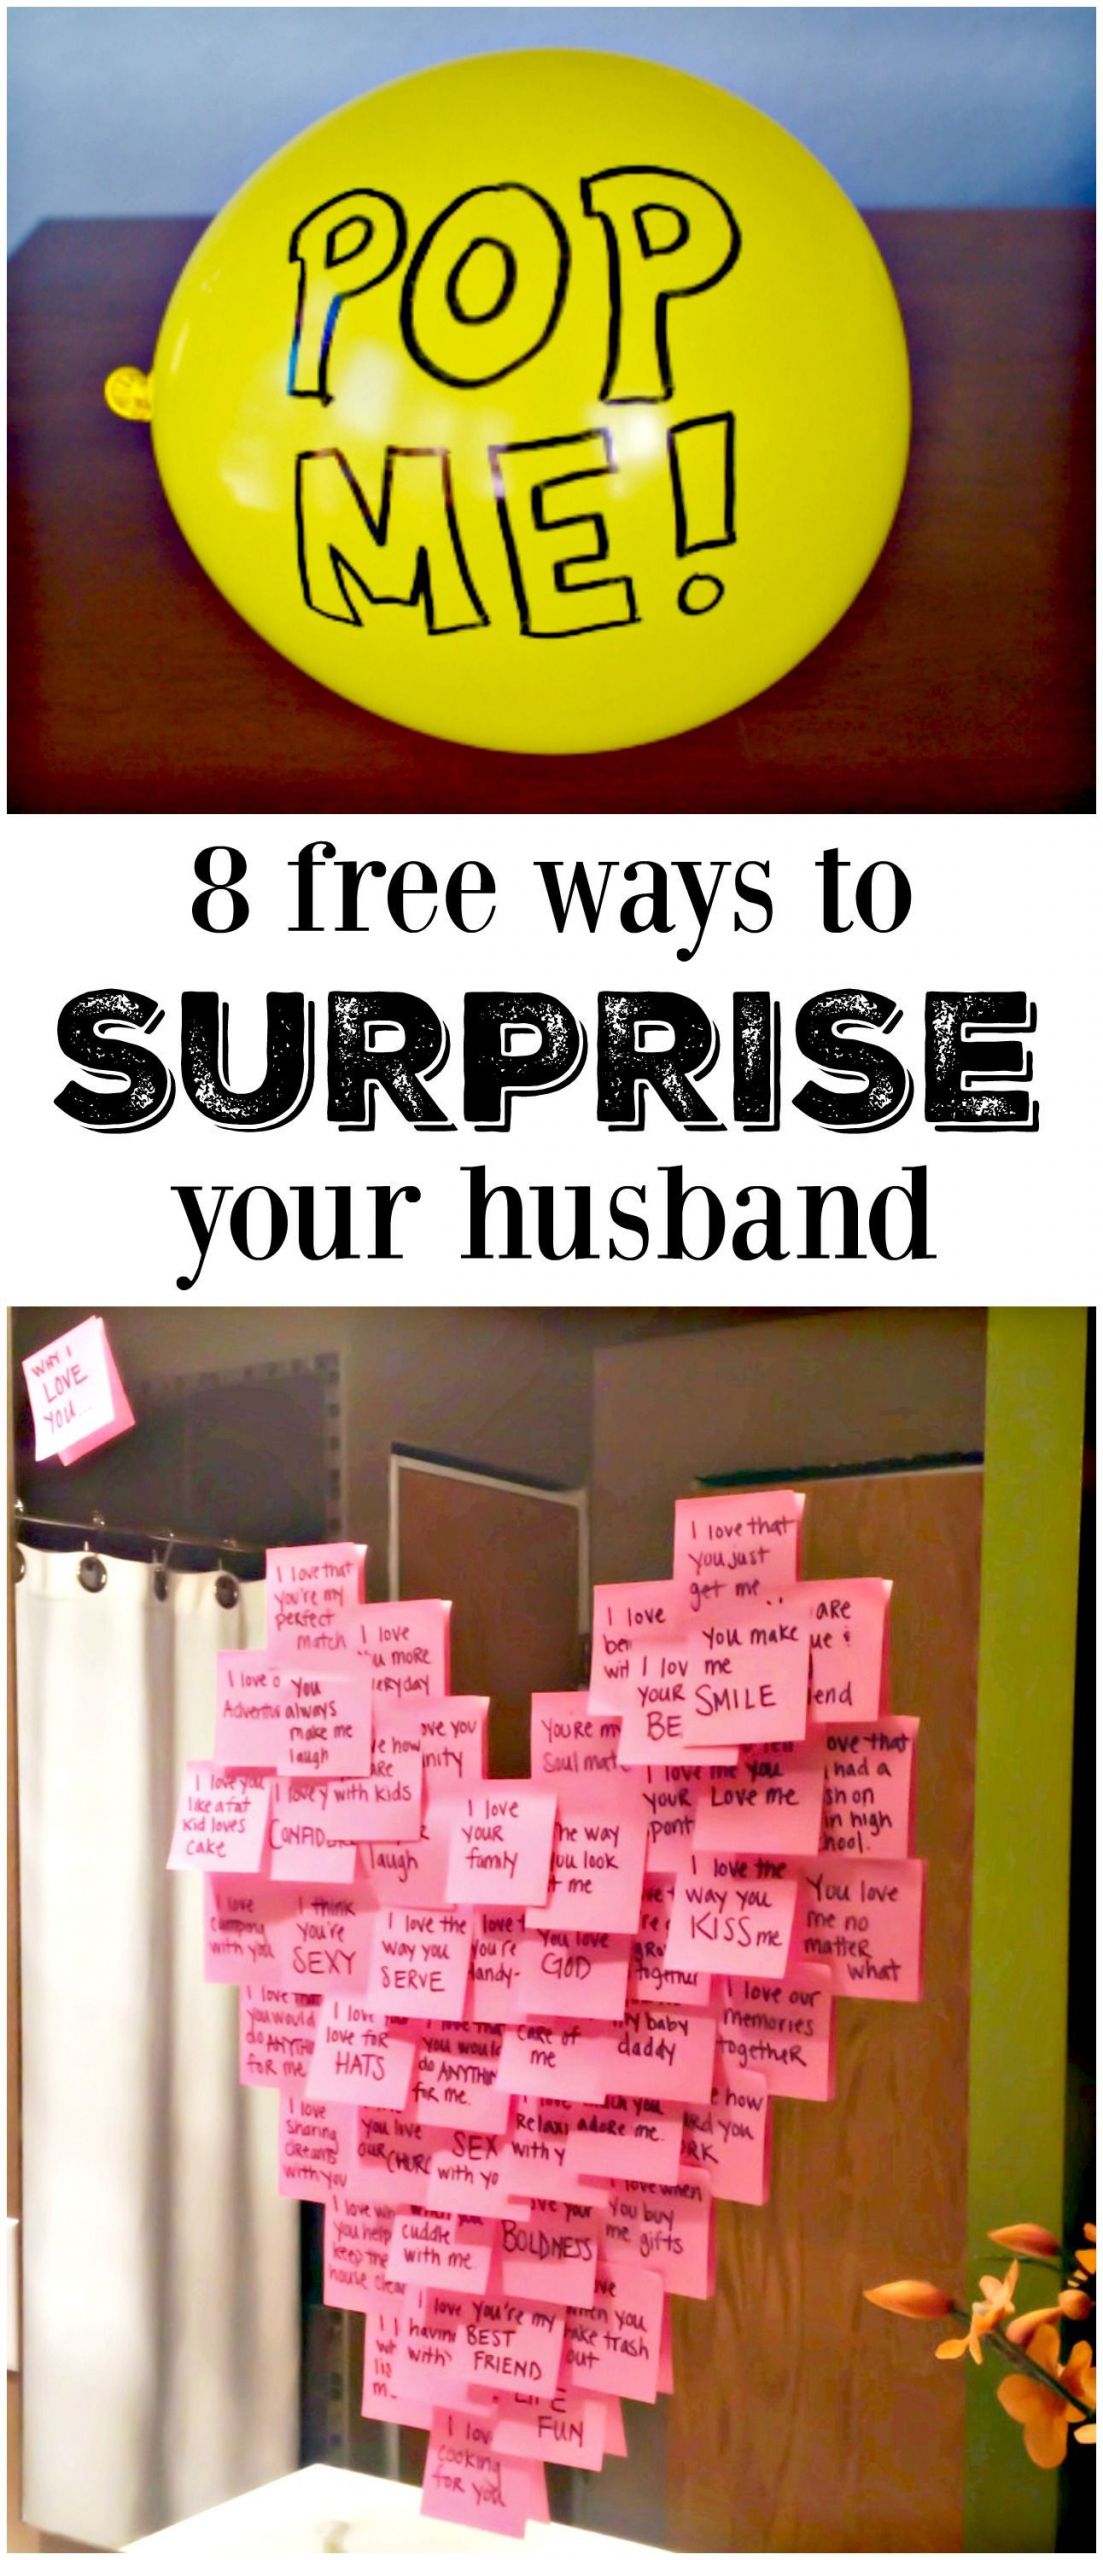 Birthday Gifts For Husband Ideas
 8 Meaningful Ways to Make His Day